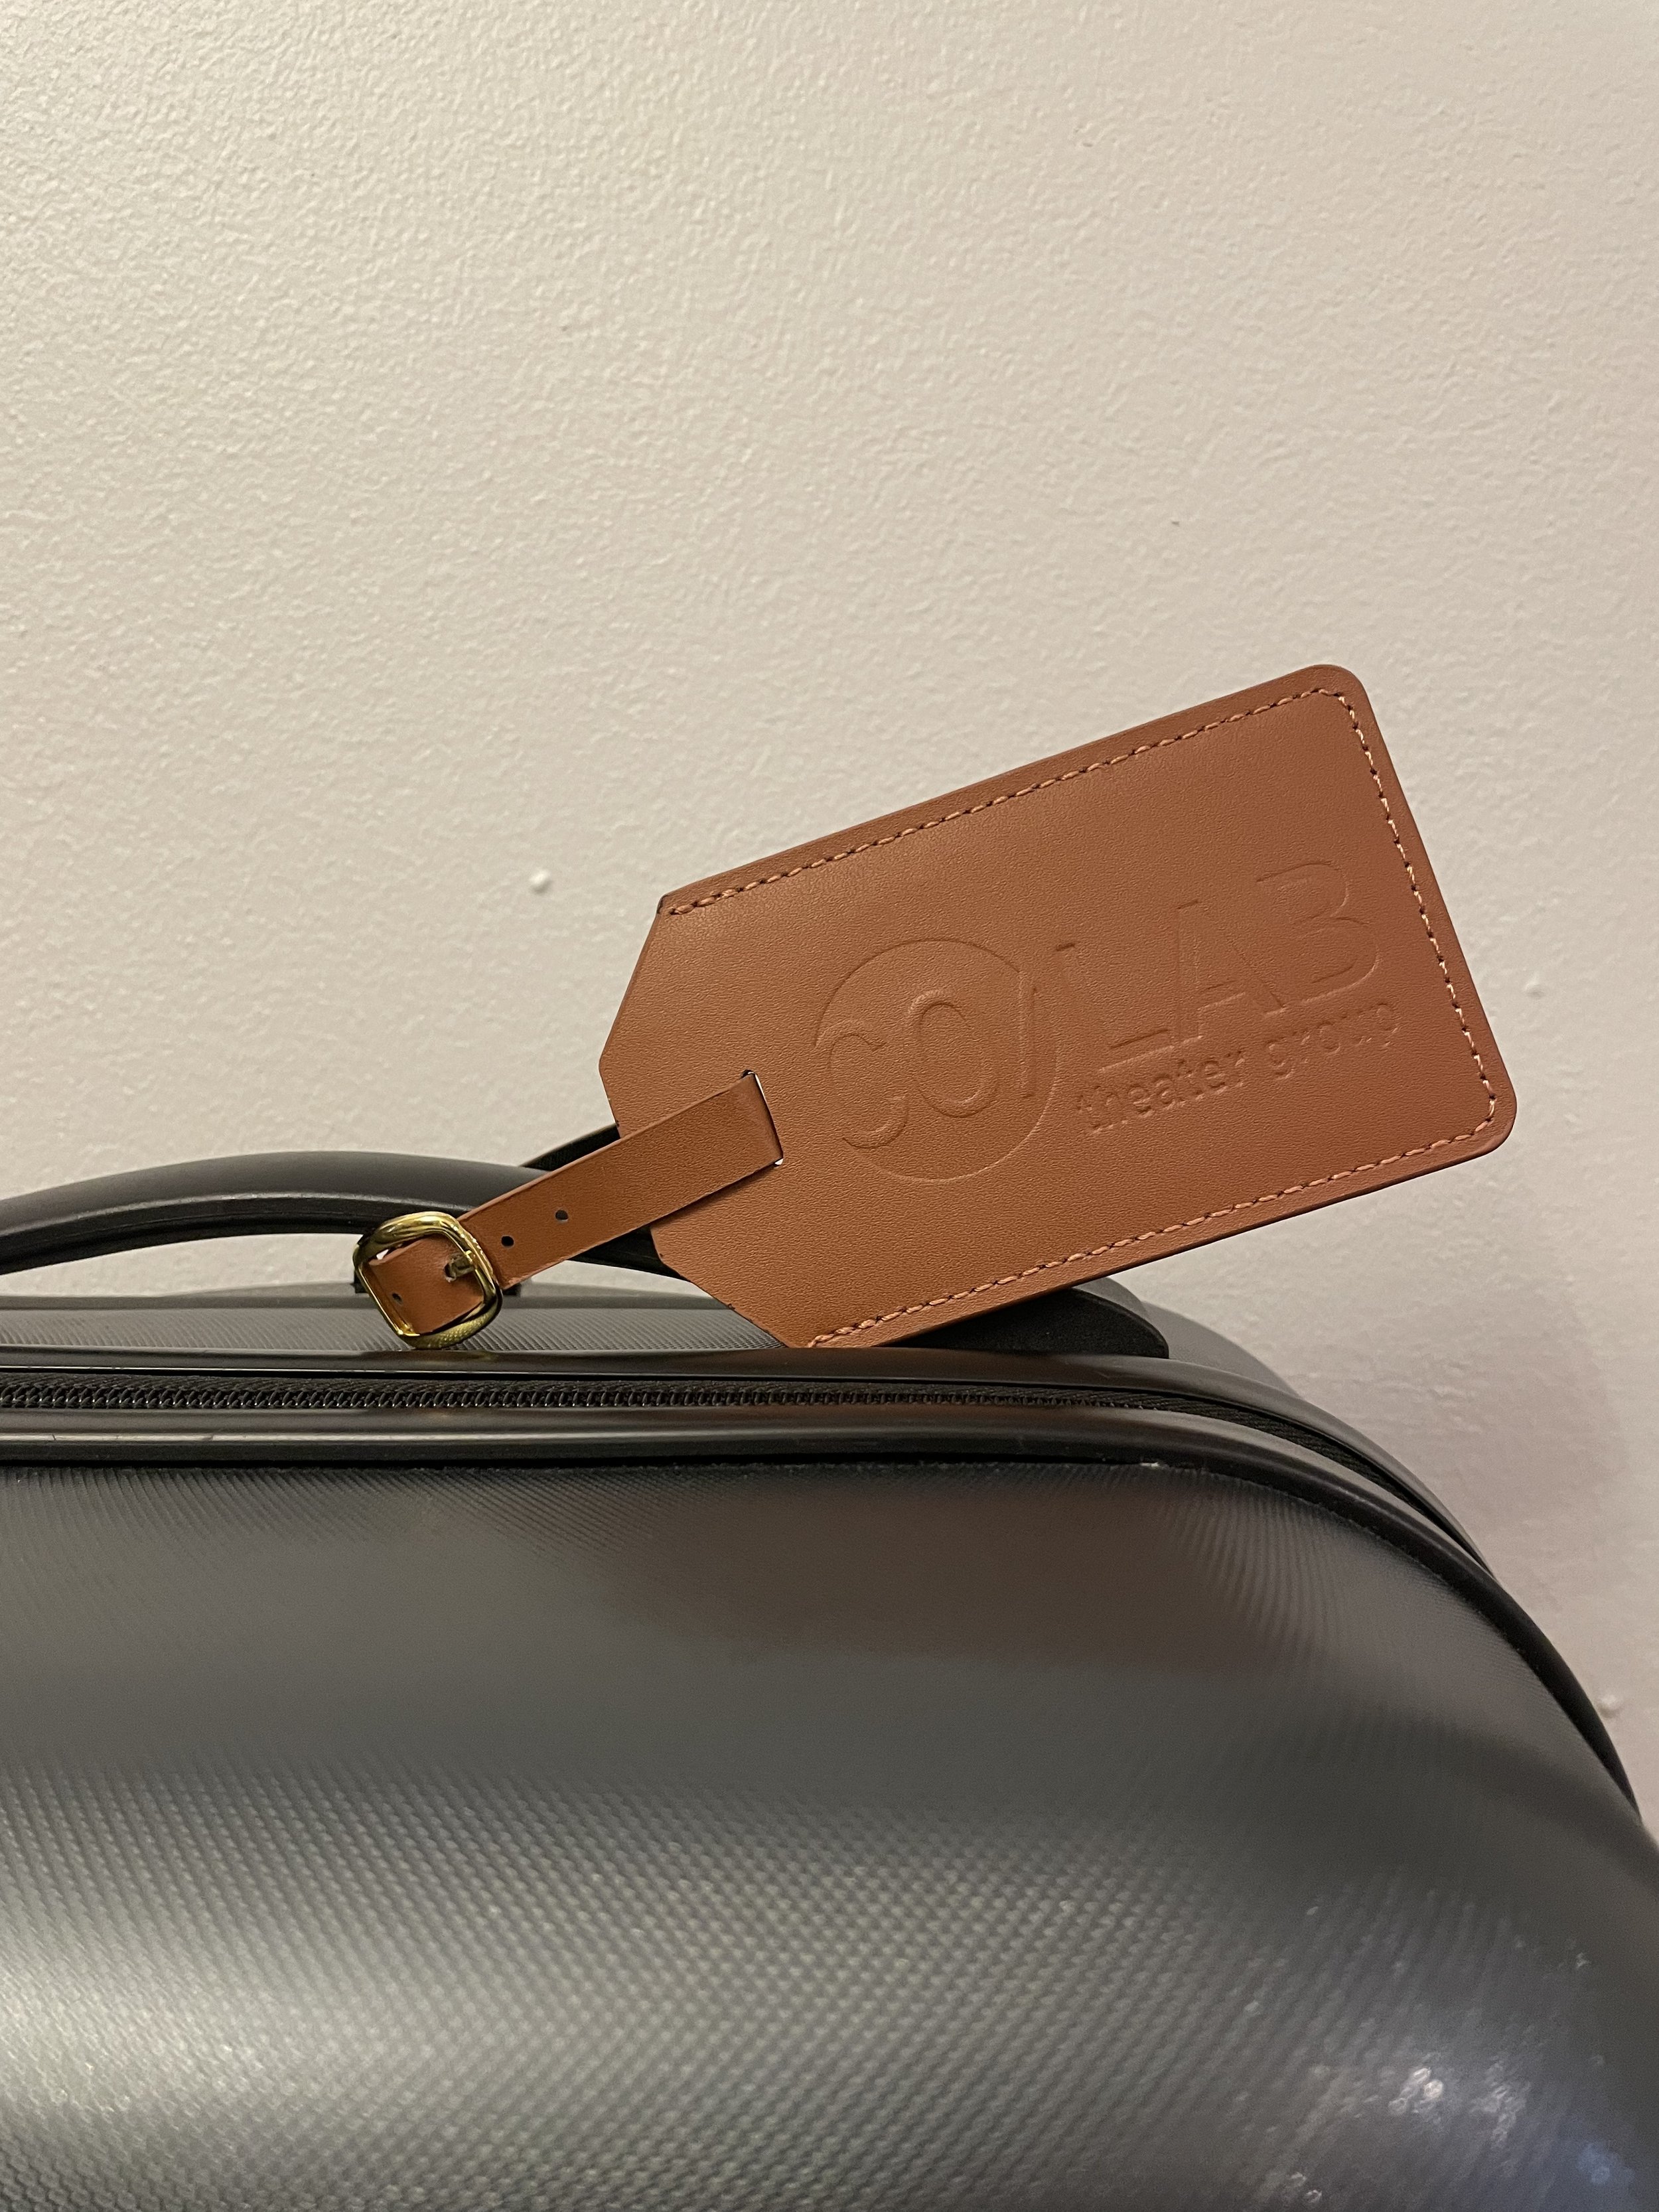 Luggage Tag — CO/LAB Theater Group